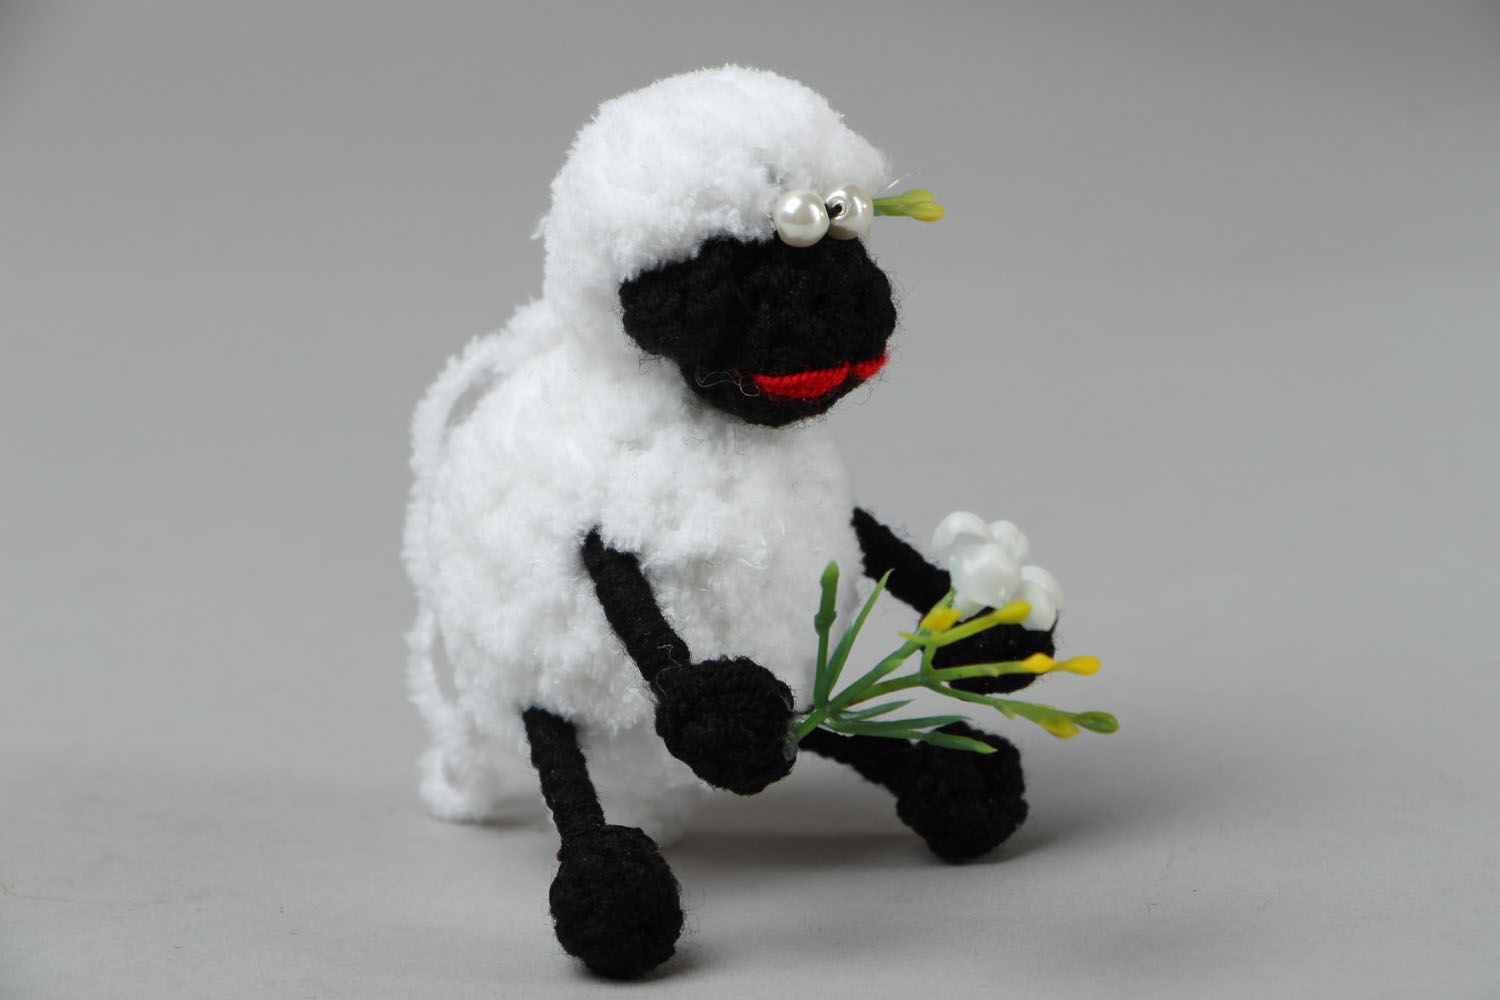 Crocheted toy photo 1